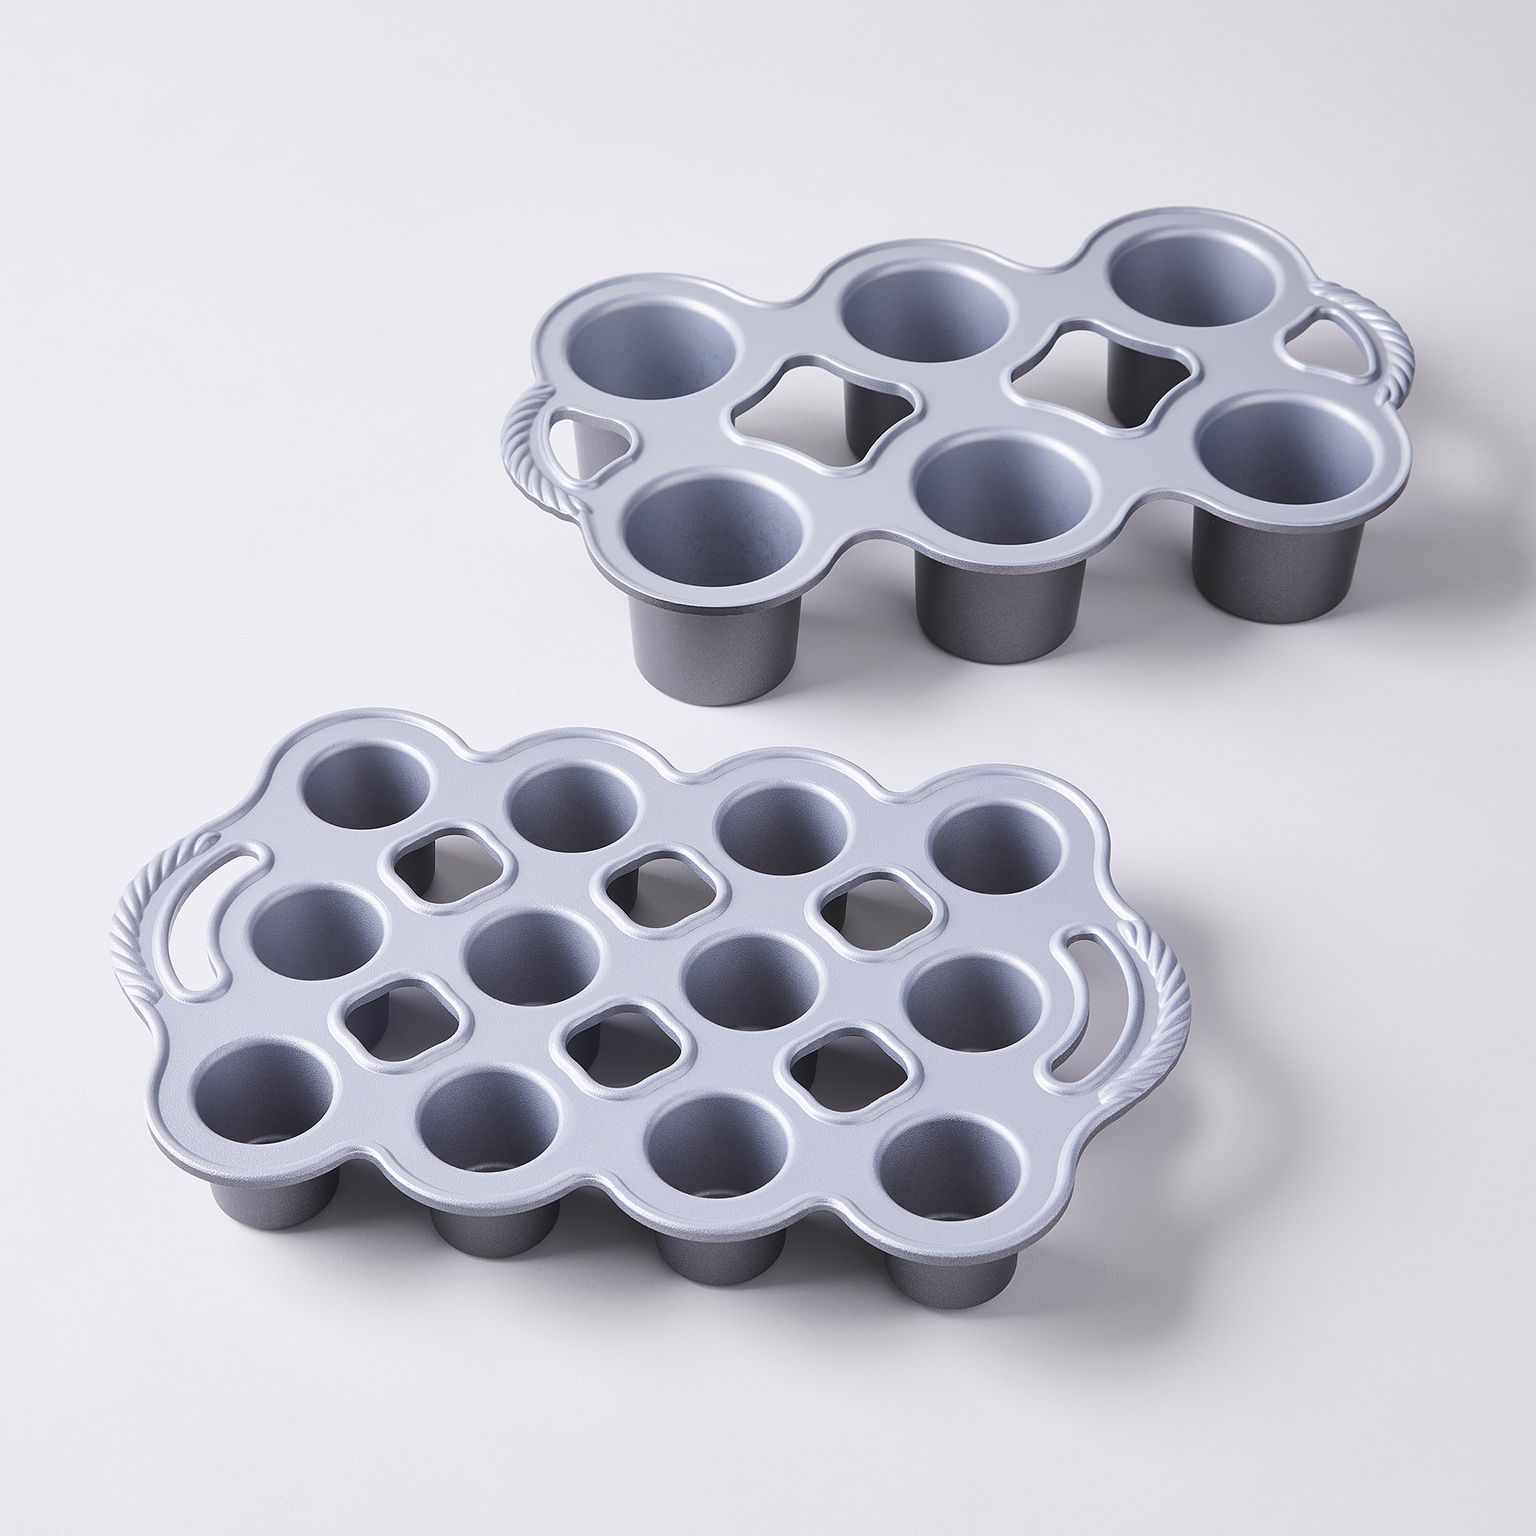 Nordic Ware Muffin Pan, 12 or 24 Cup, Nonstick Finish, Aluminum on Food52